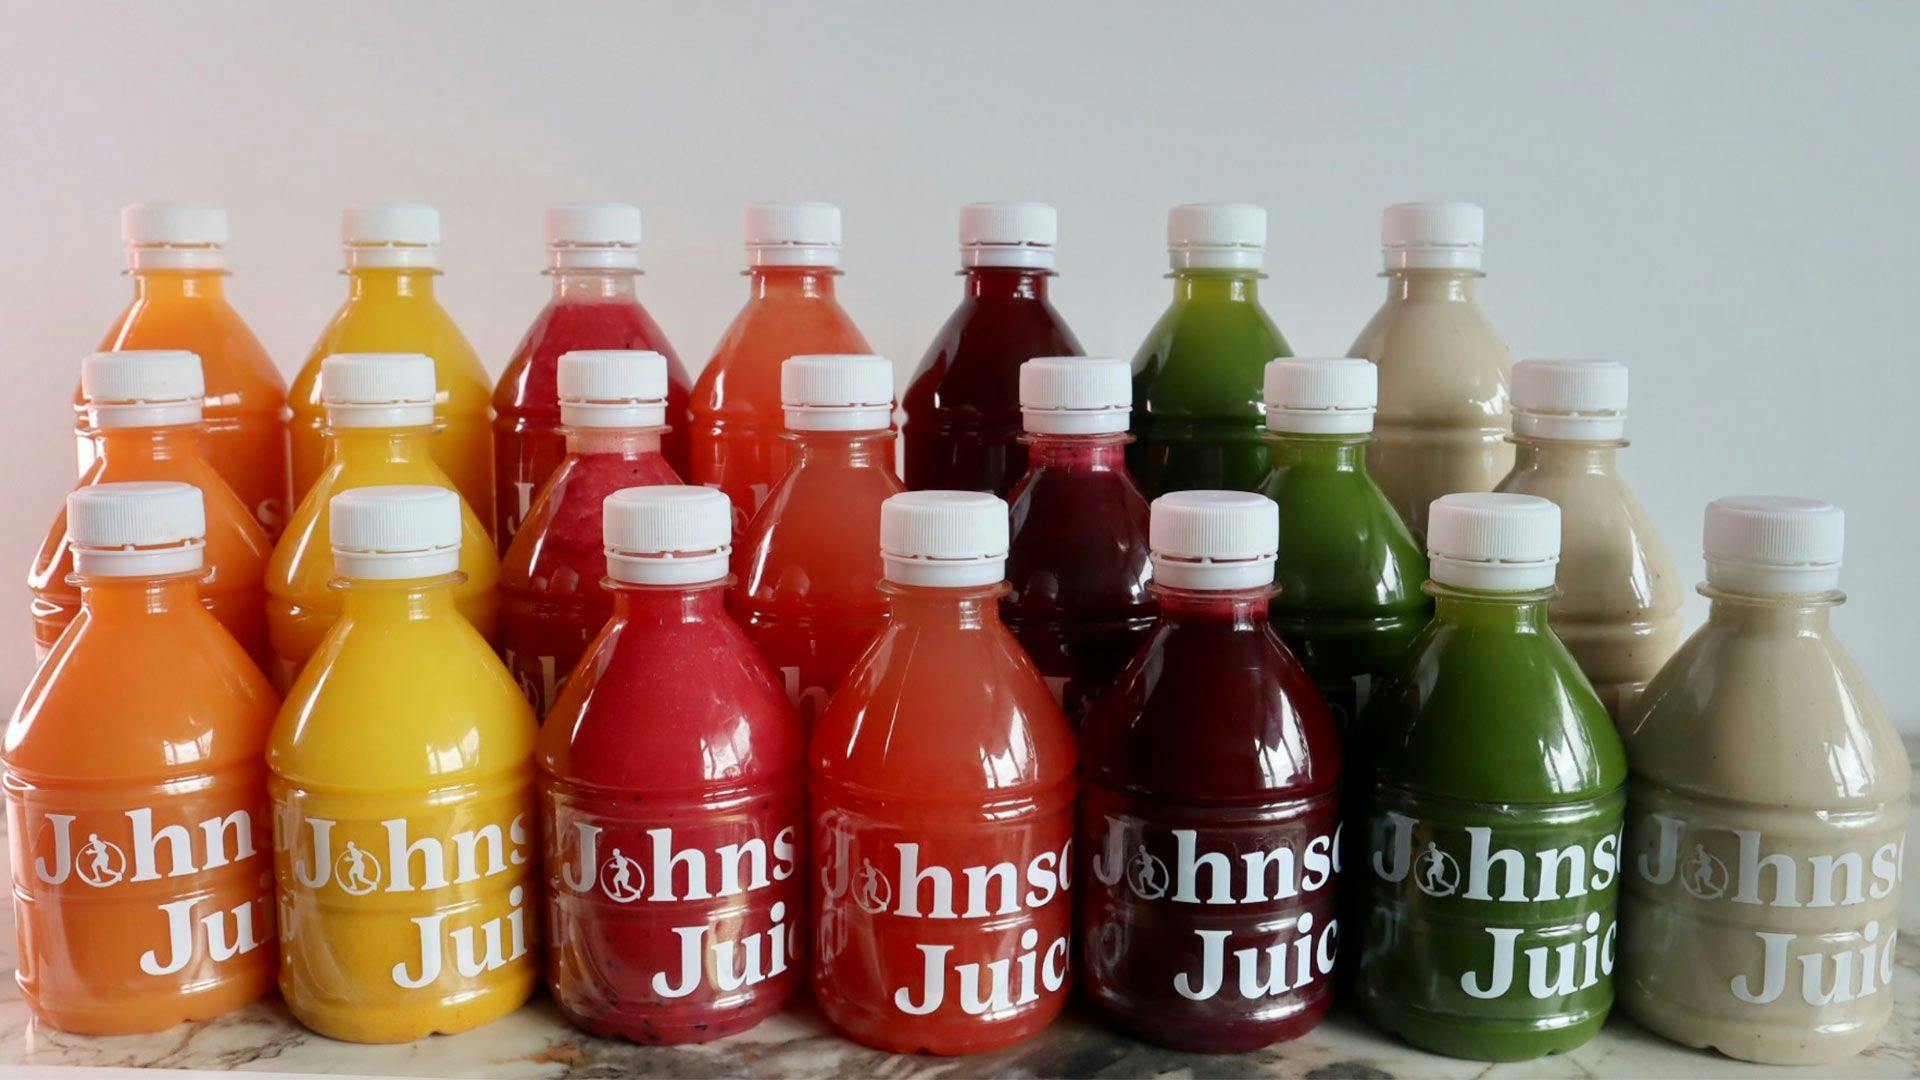 Johnsons Juicery cover image